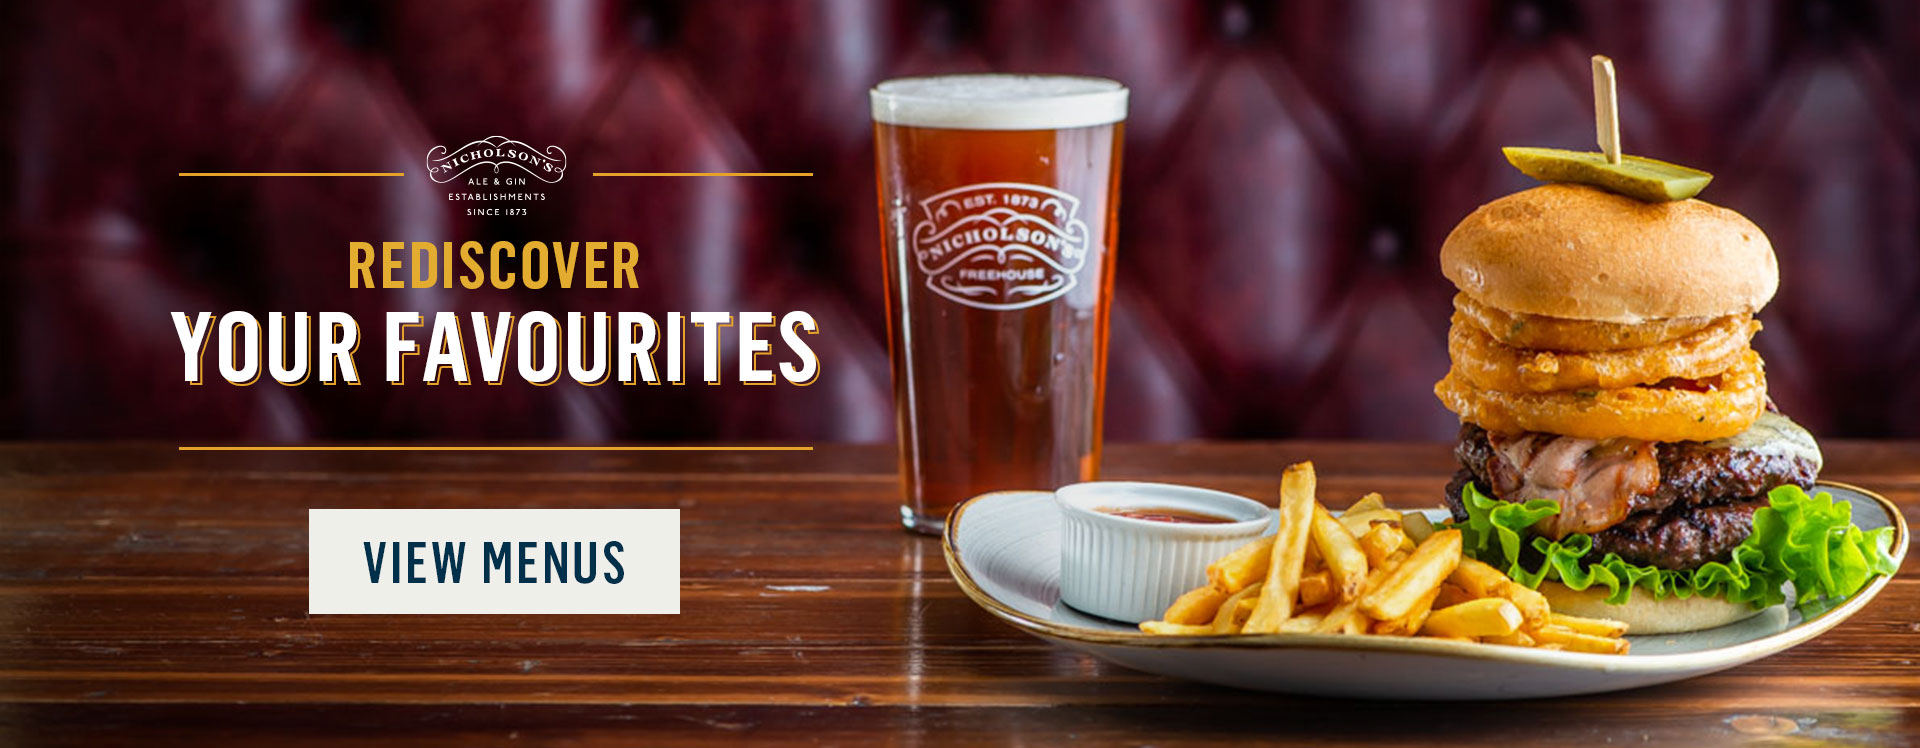 Rediscover your favourites at The Curler's Rest